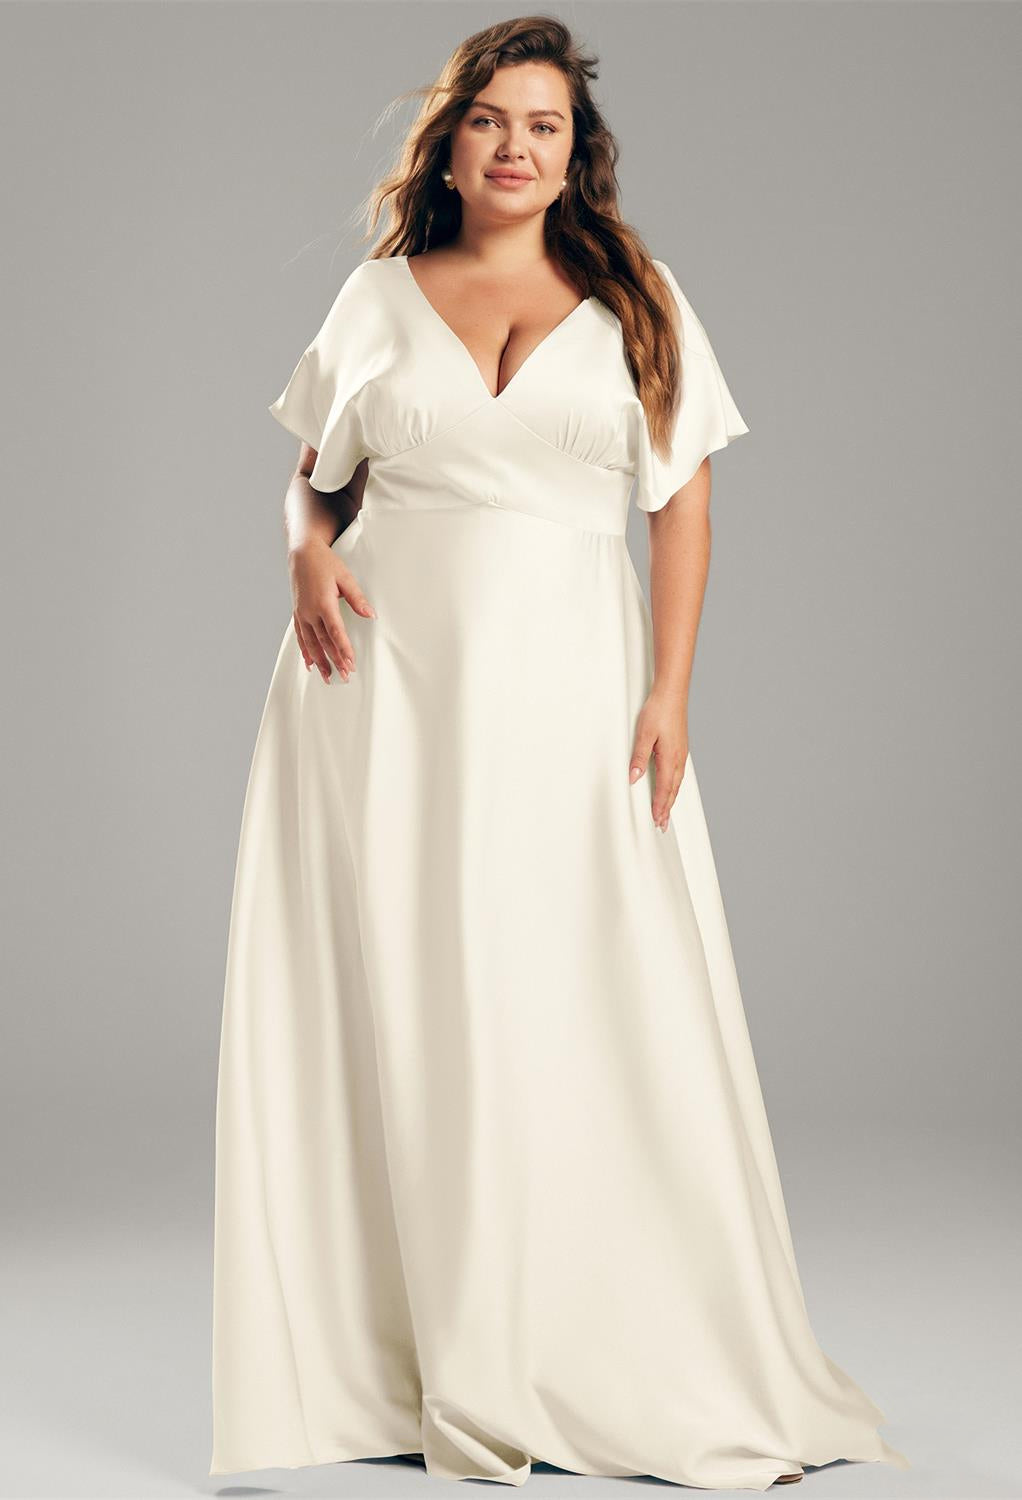 A plus size bride in a white gown, the Nora - Satin Charmeuse Bridesmaid Dress - Off The Rack from Bergamot Bridal, with a v-neck and v-back.